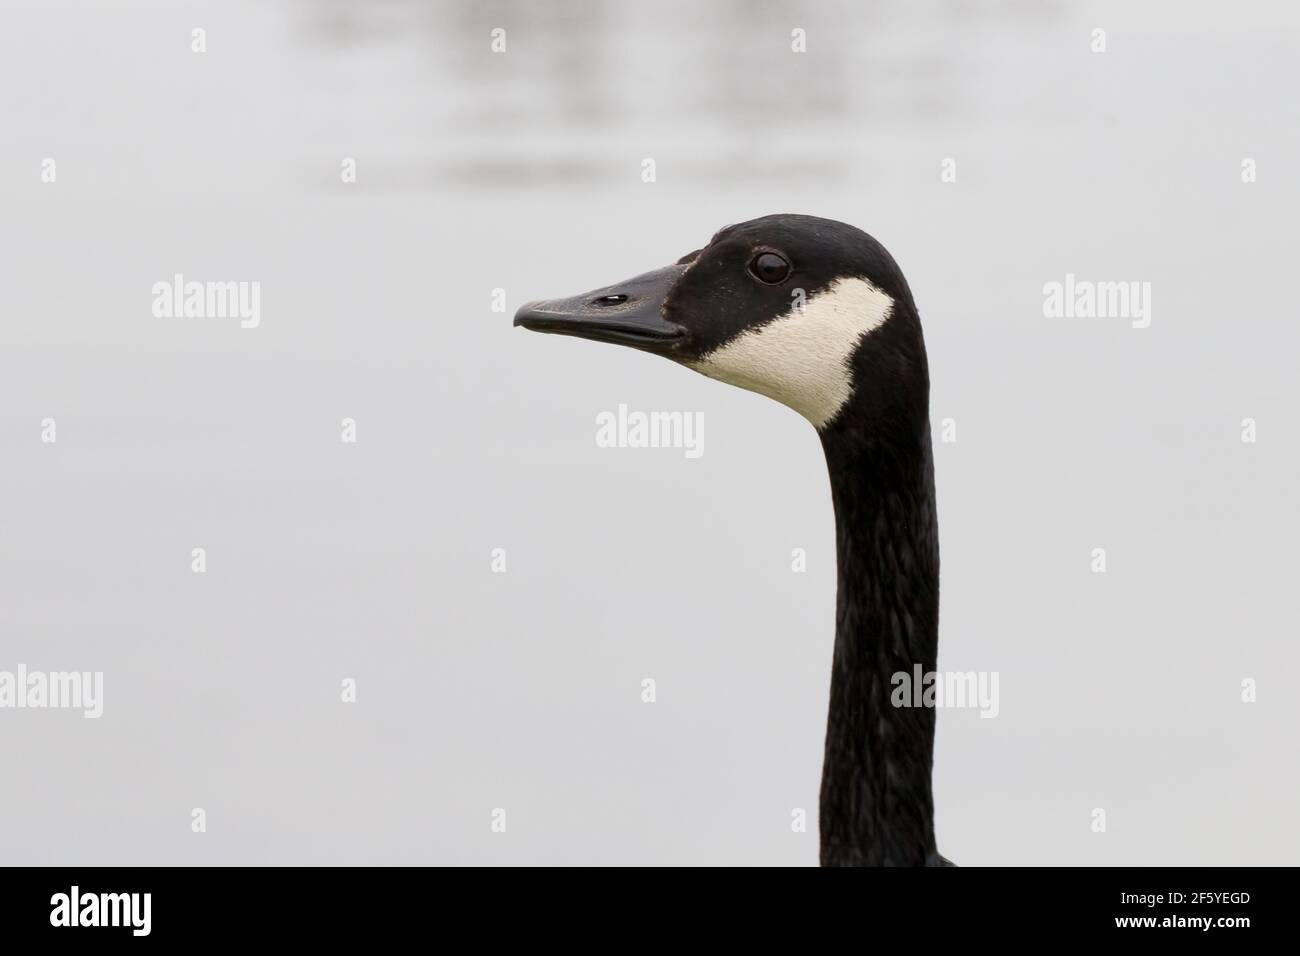 Canada Goose portrait. Head and neck closeup with a grey background. Humorous photo that resembles a profile mug shot. Stock Photo